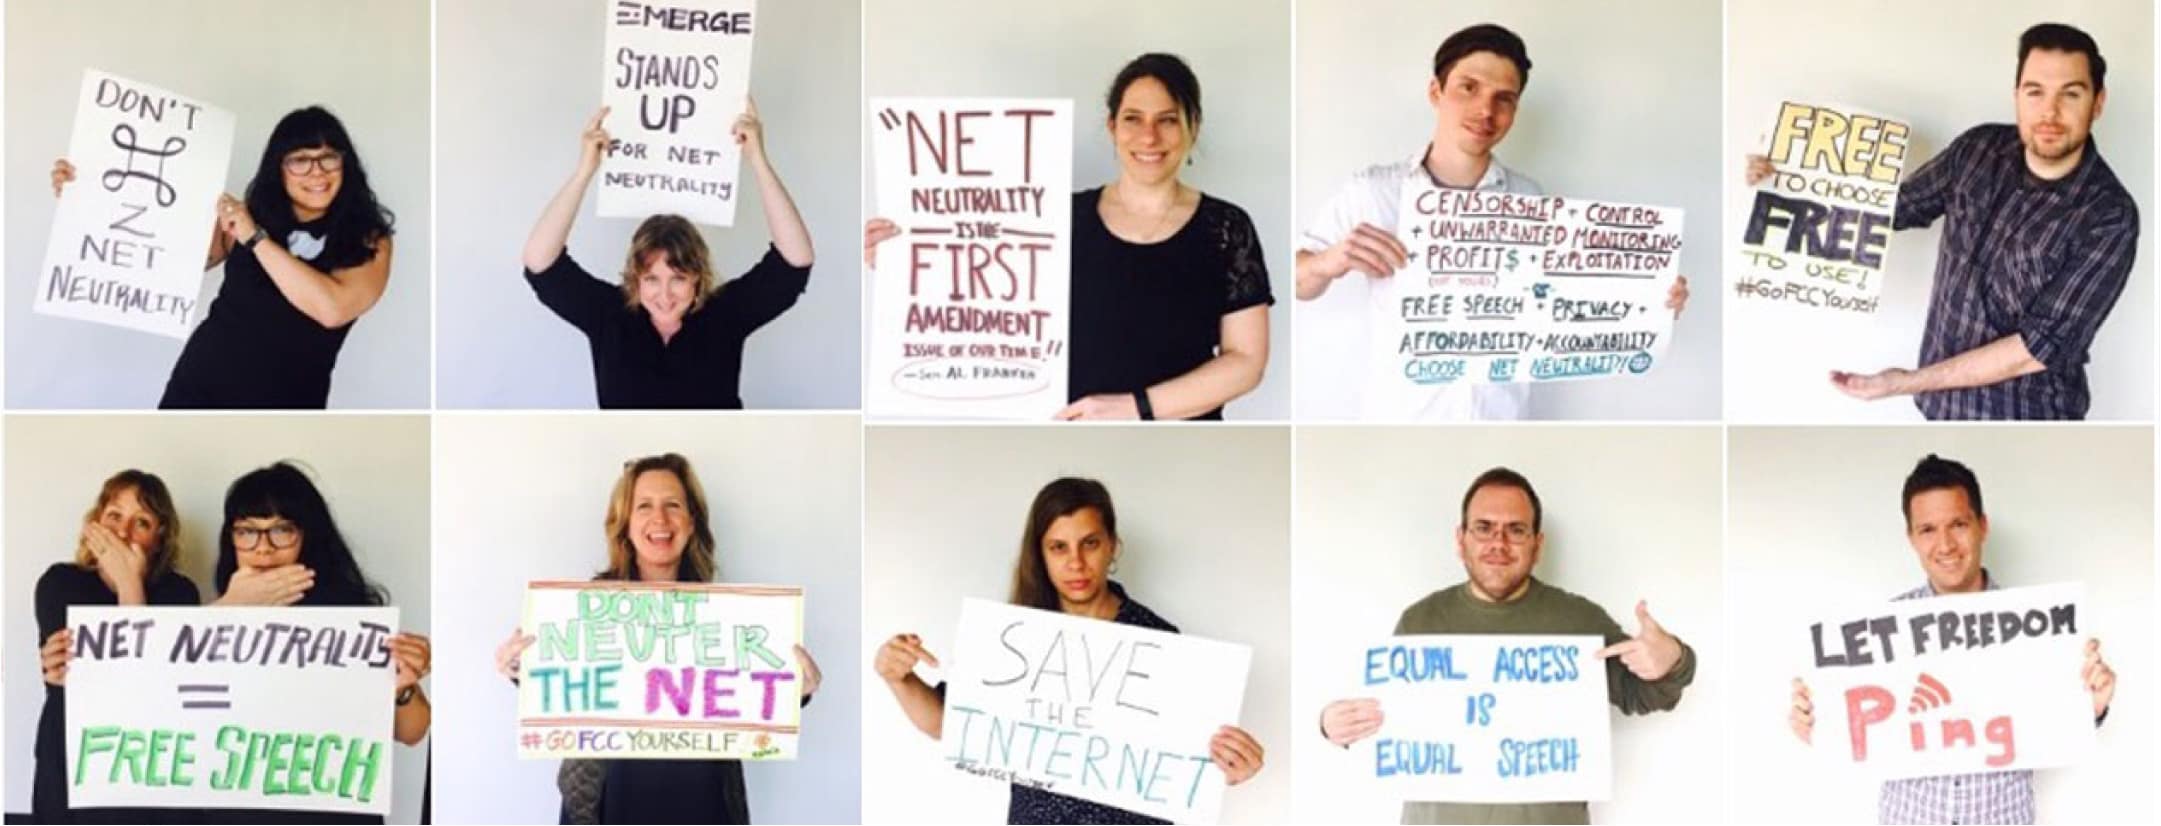 Emerge Stands Up for Net Neutrality